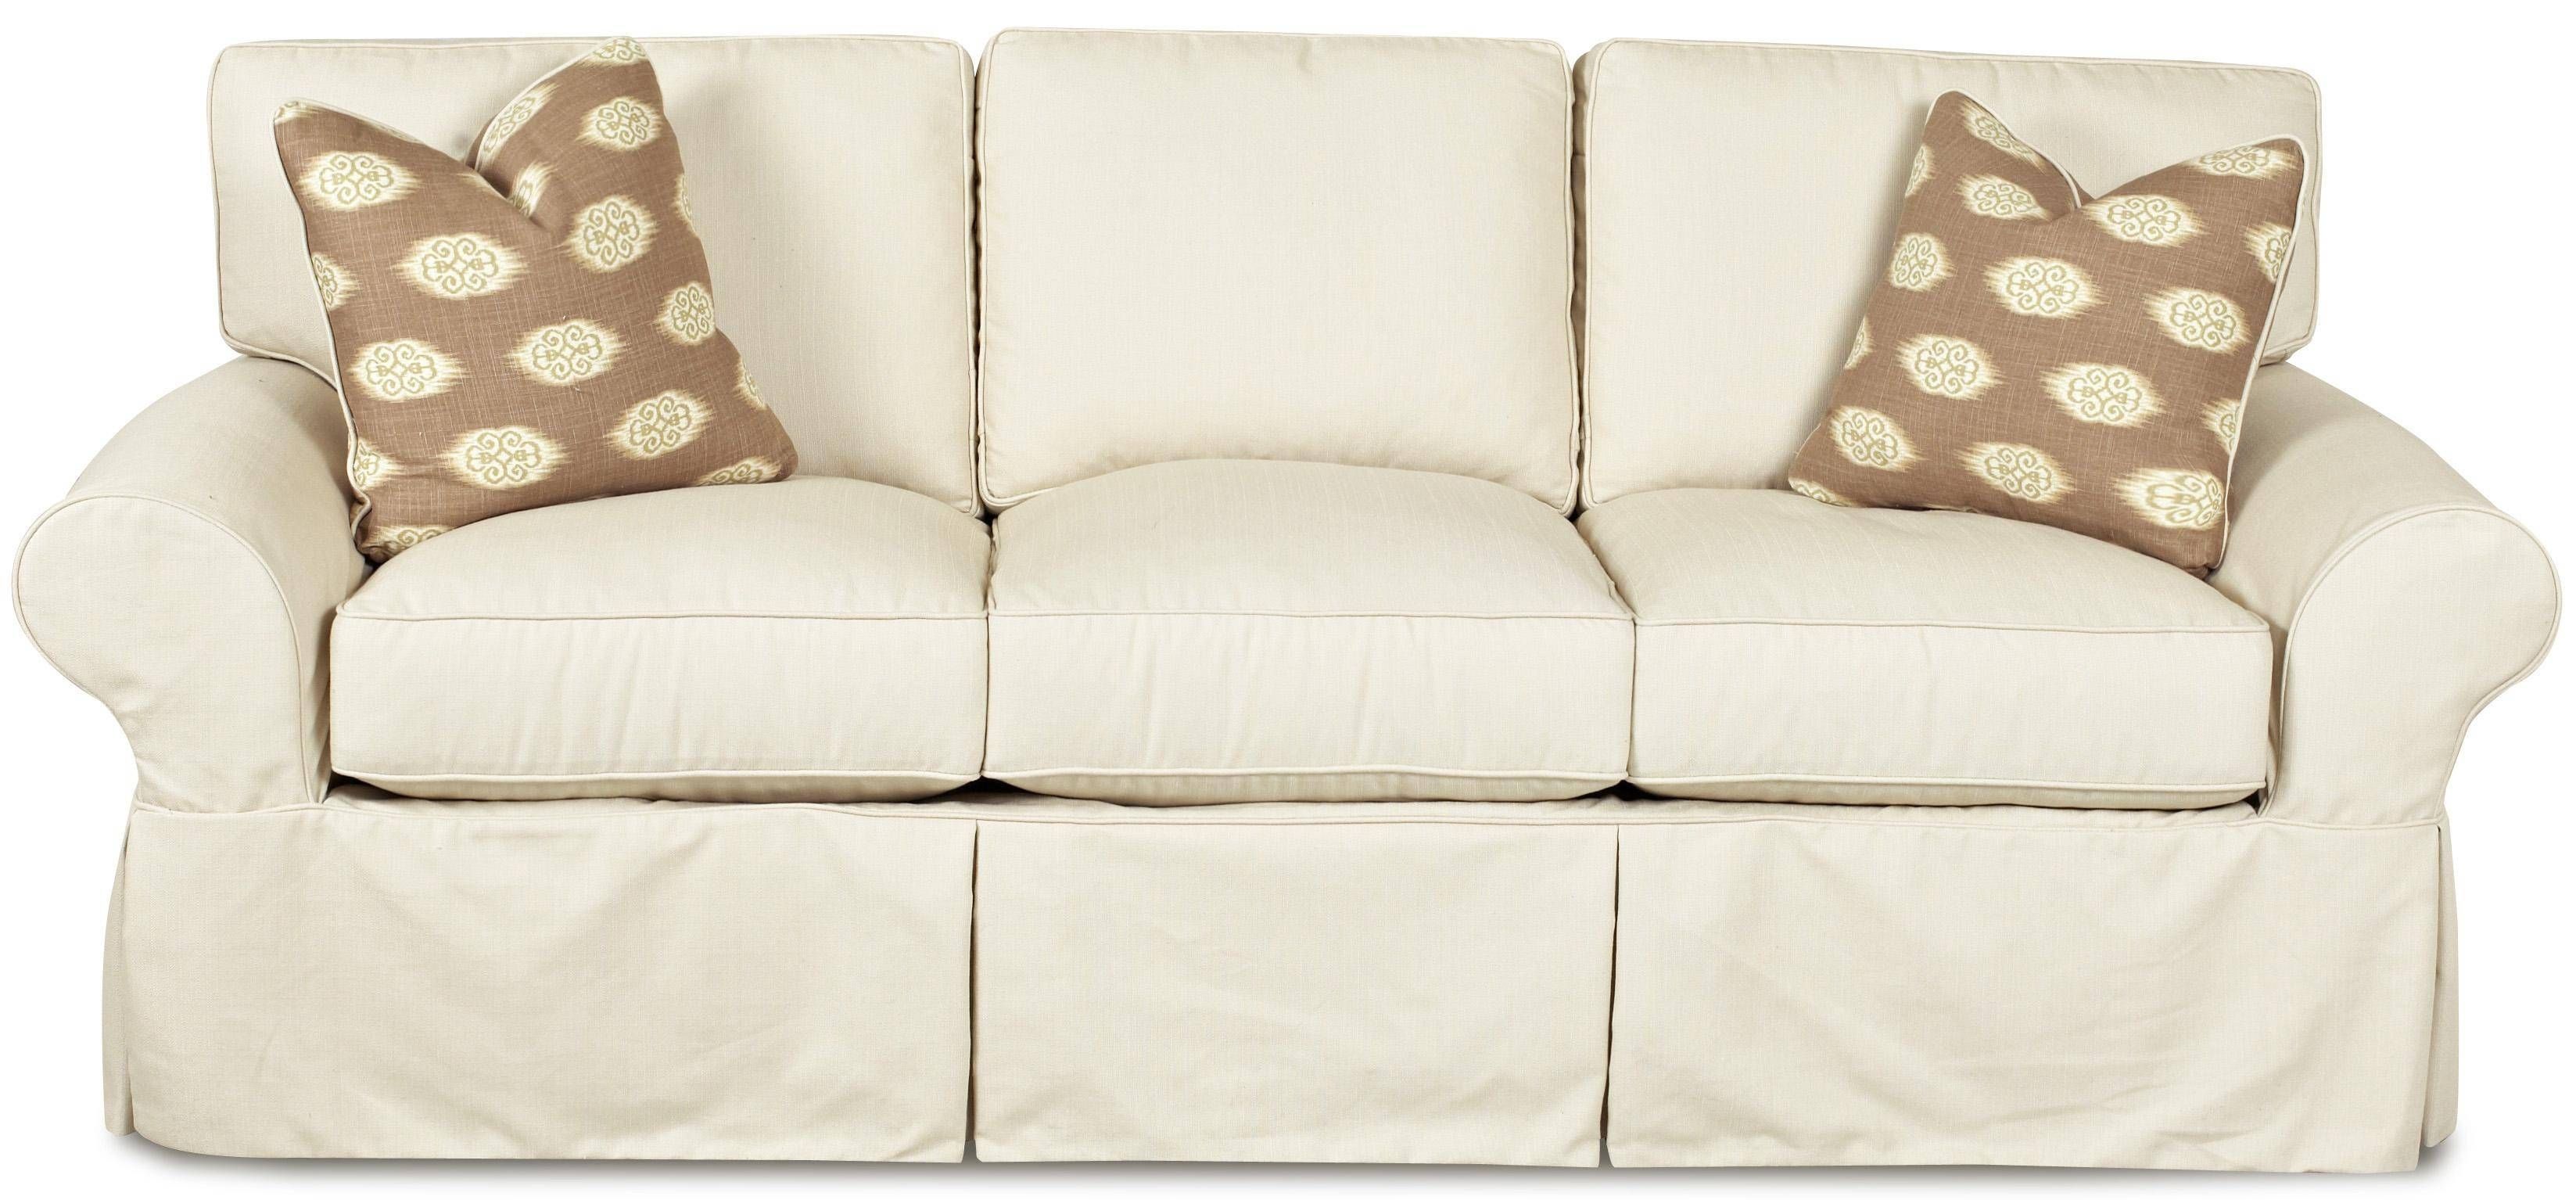 Furniture: Perfect Living Room With Sofa Slipcovers Walmart For Regarding Walmart Slipcovers For Sofas (Photo 19 of 30)